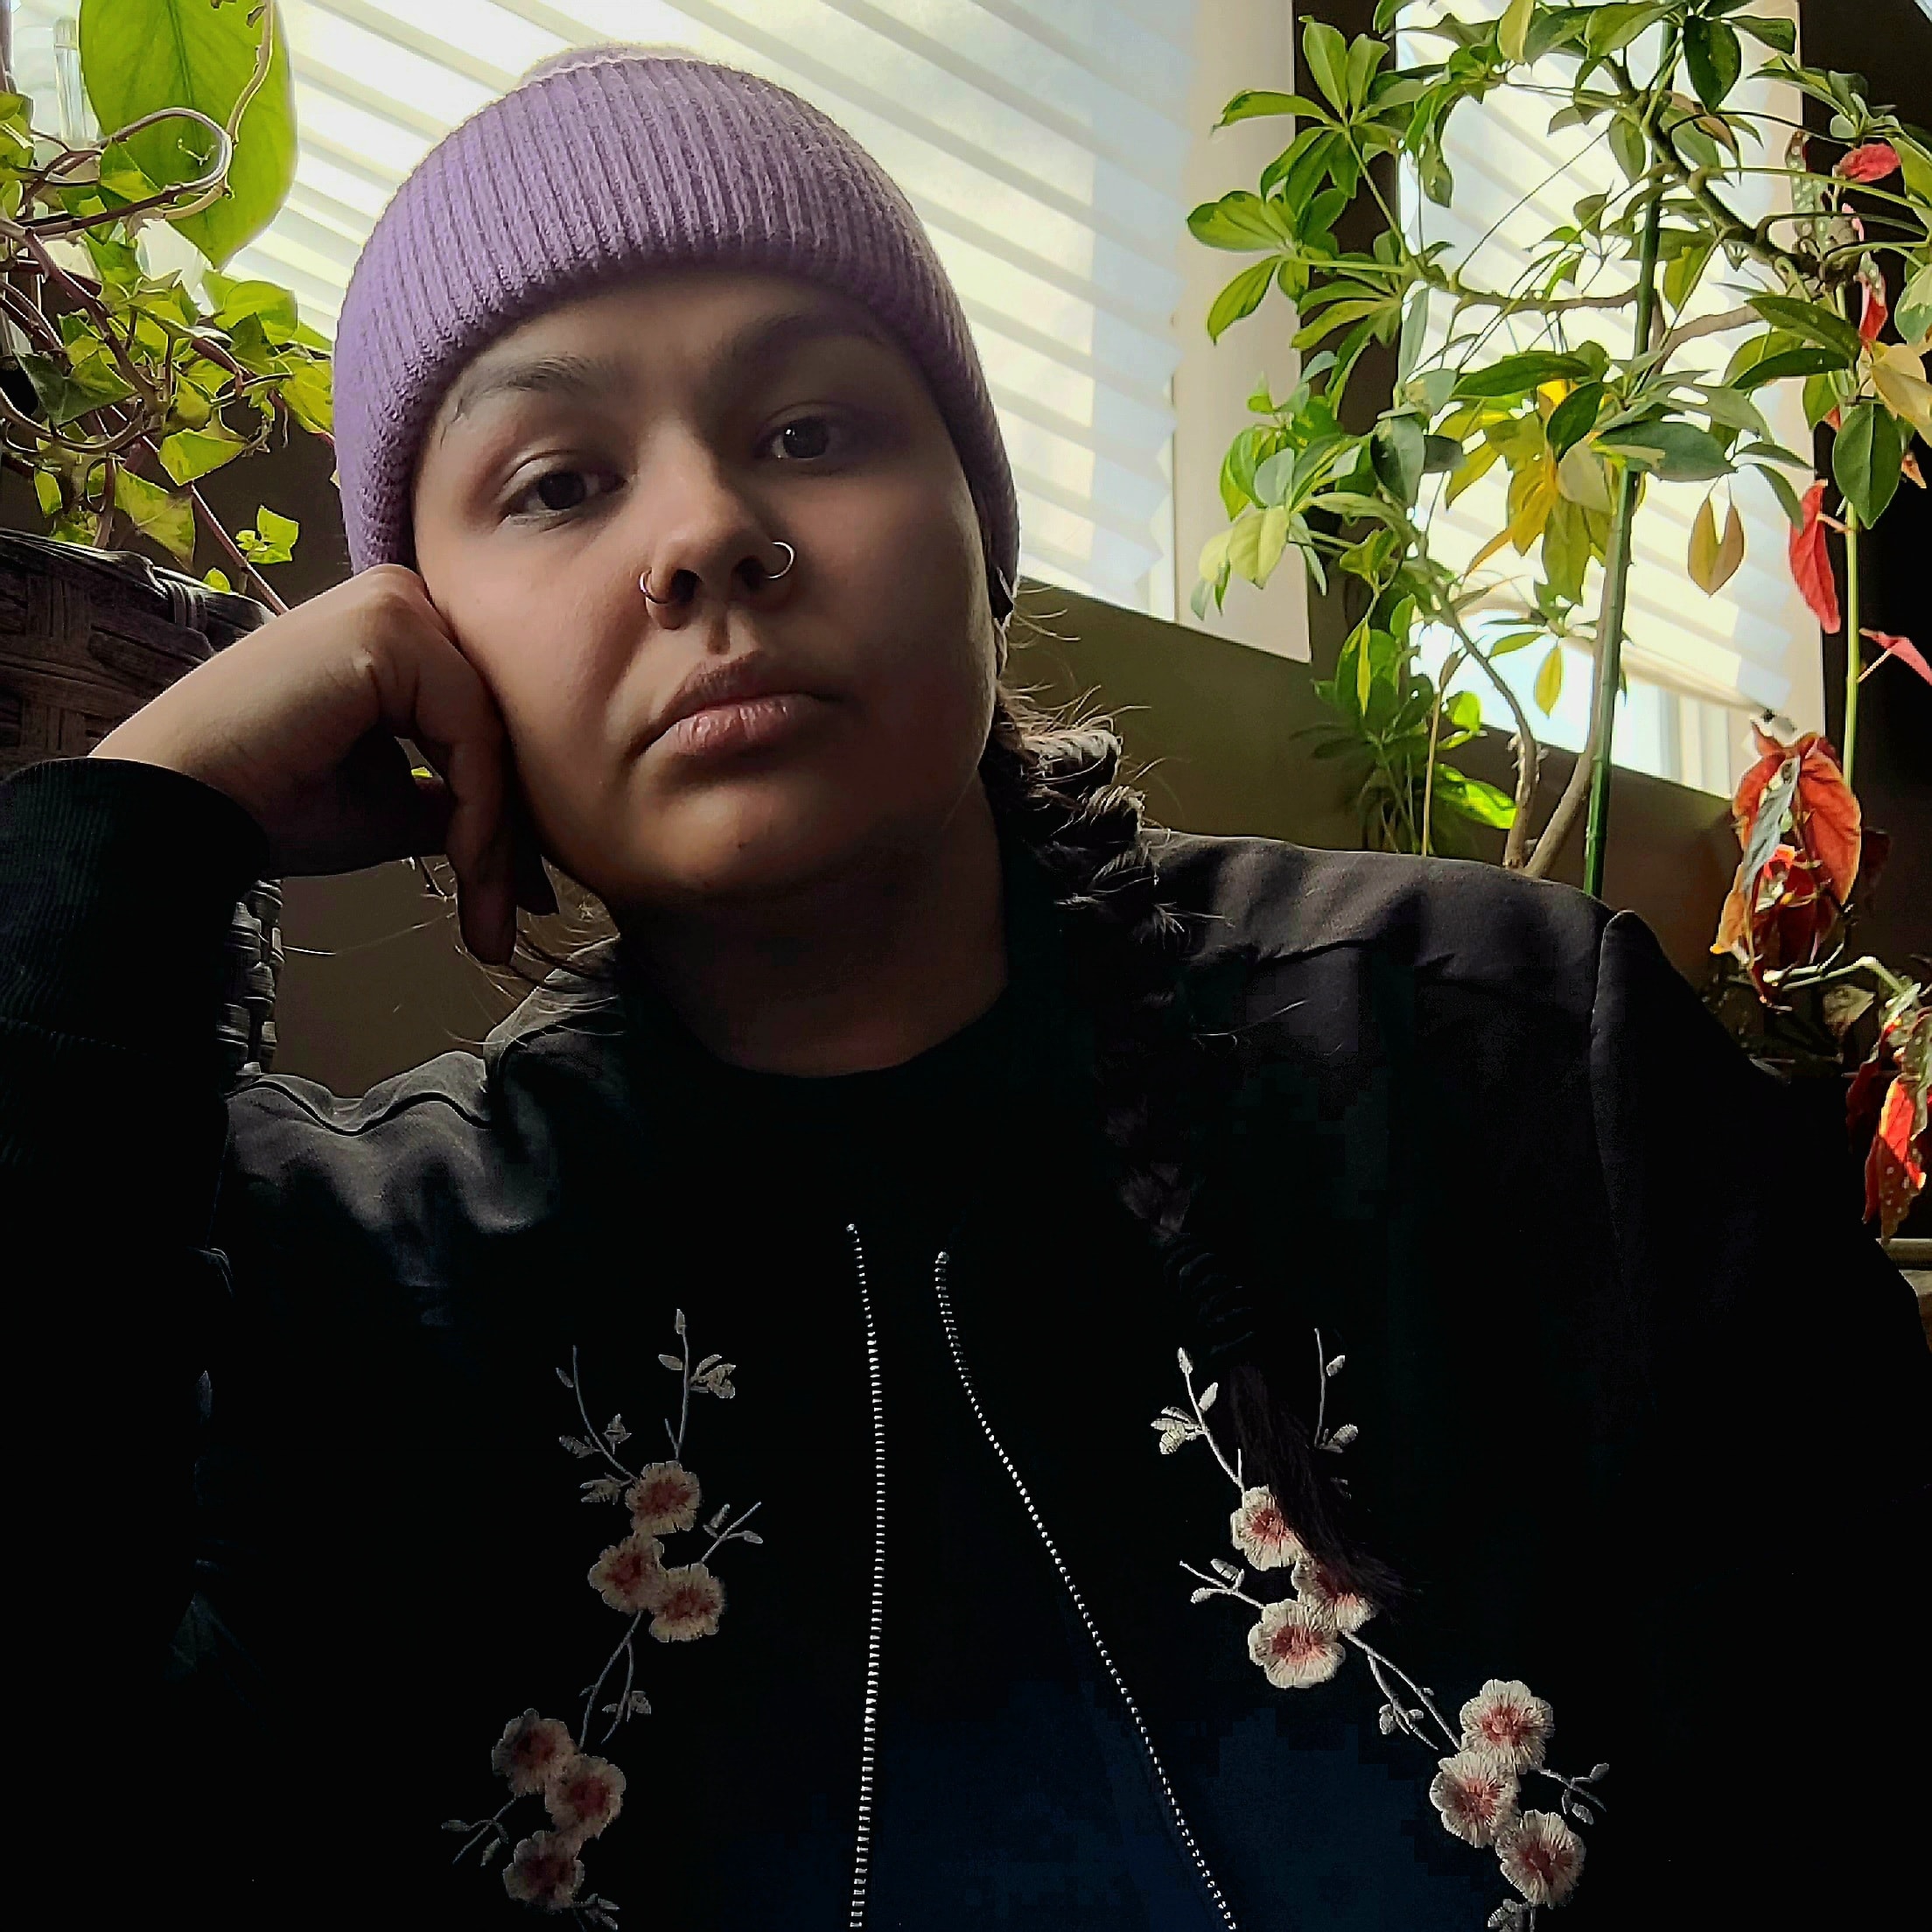 A person wearing a purple hat and a bomber jacket with flowers on it looks into a camera